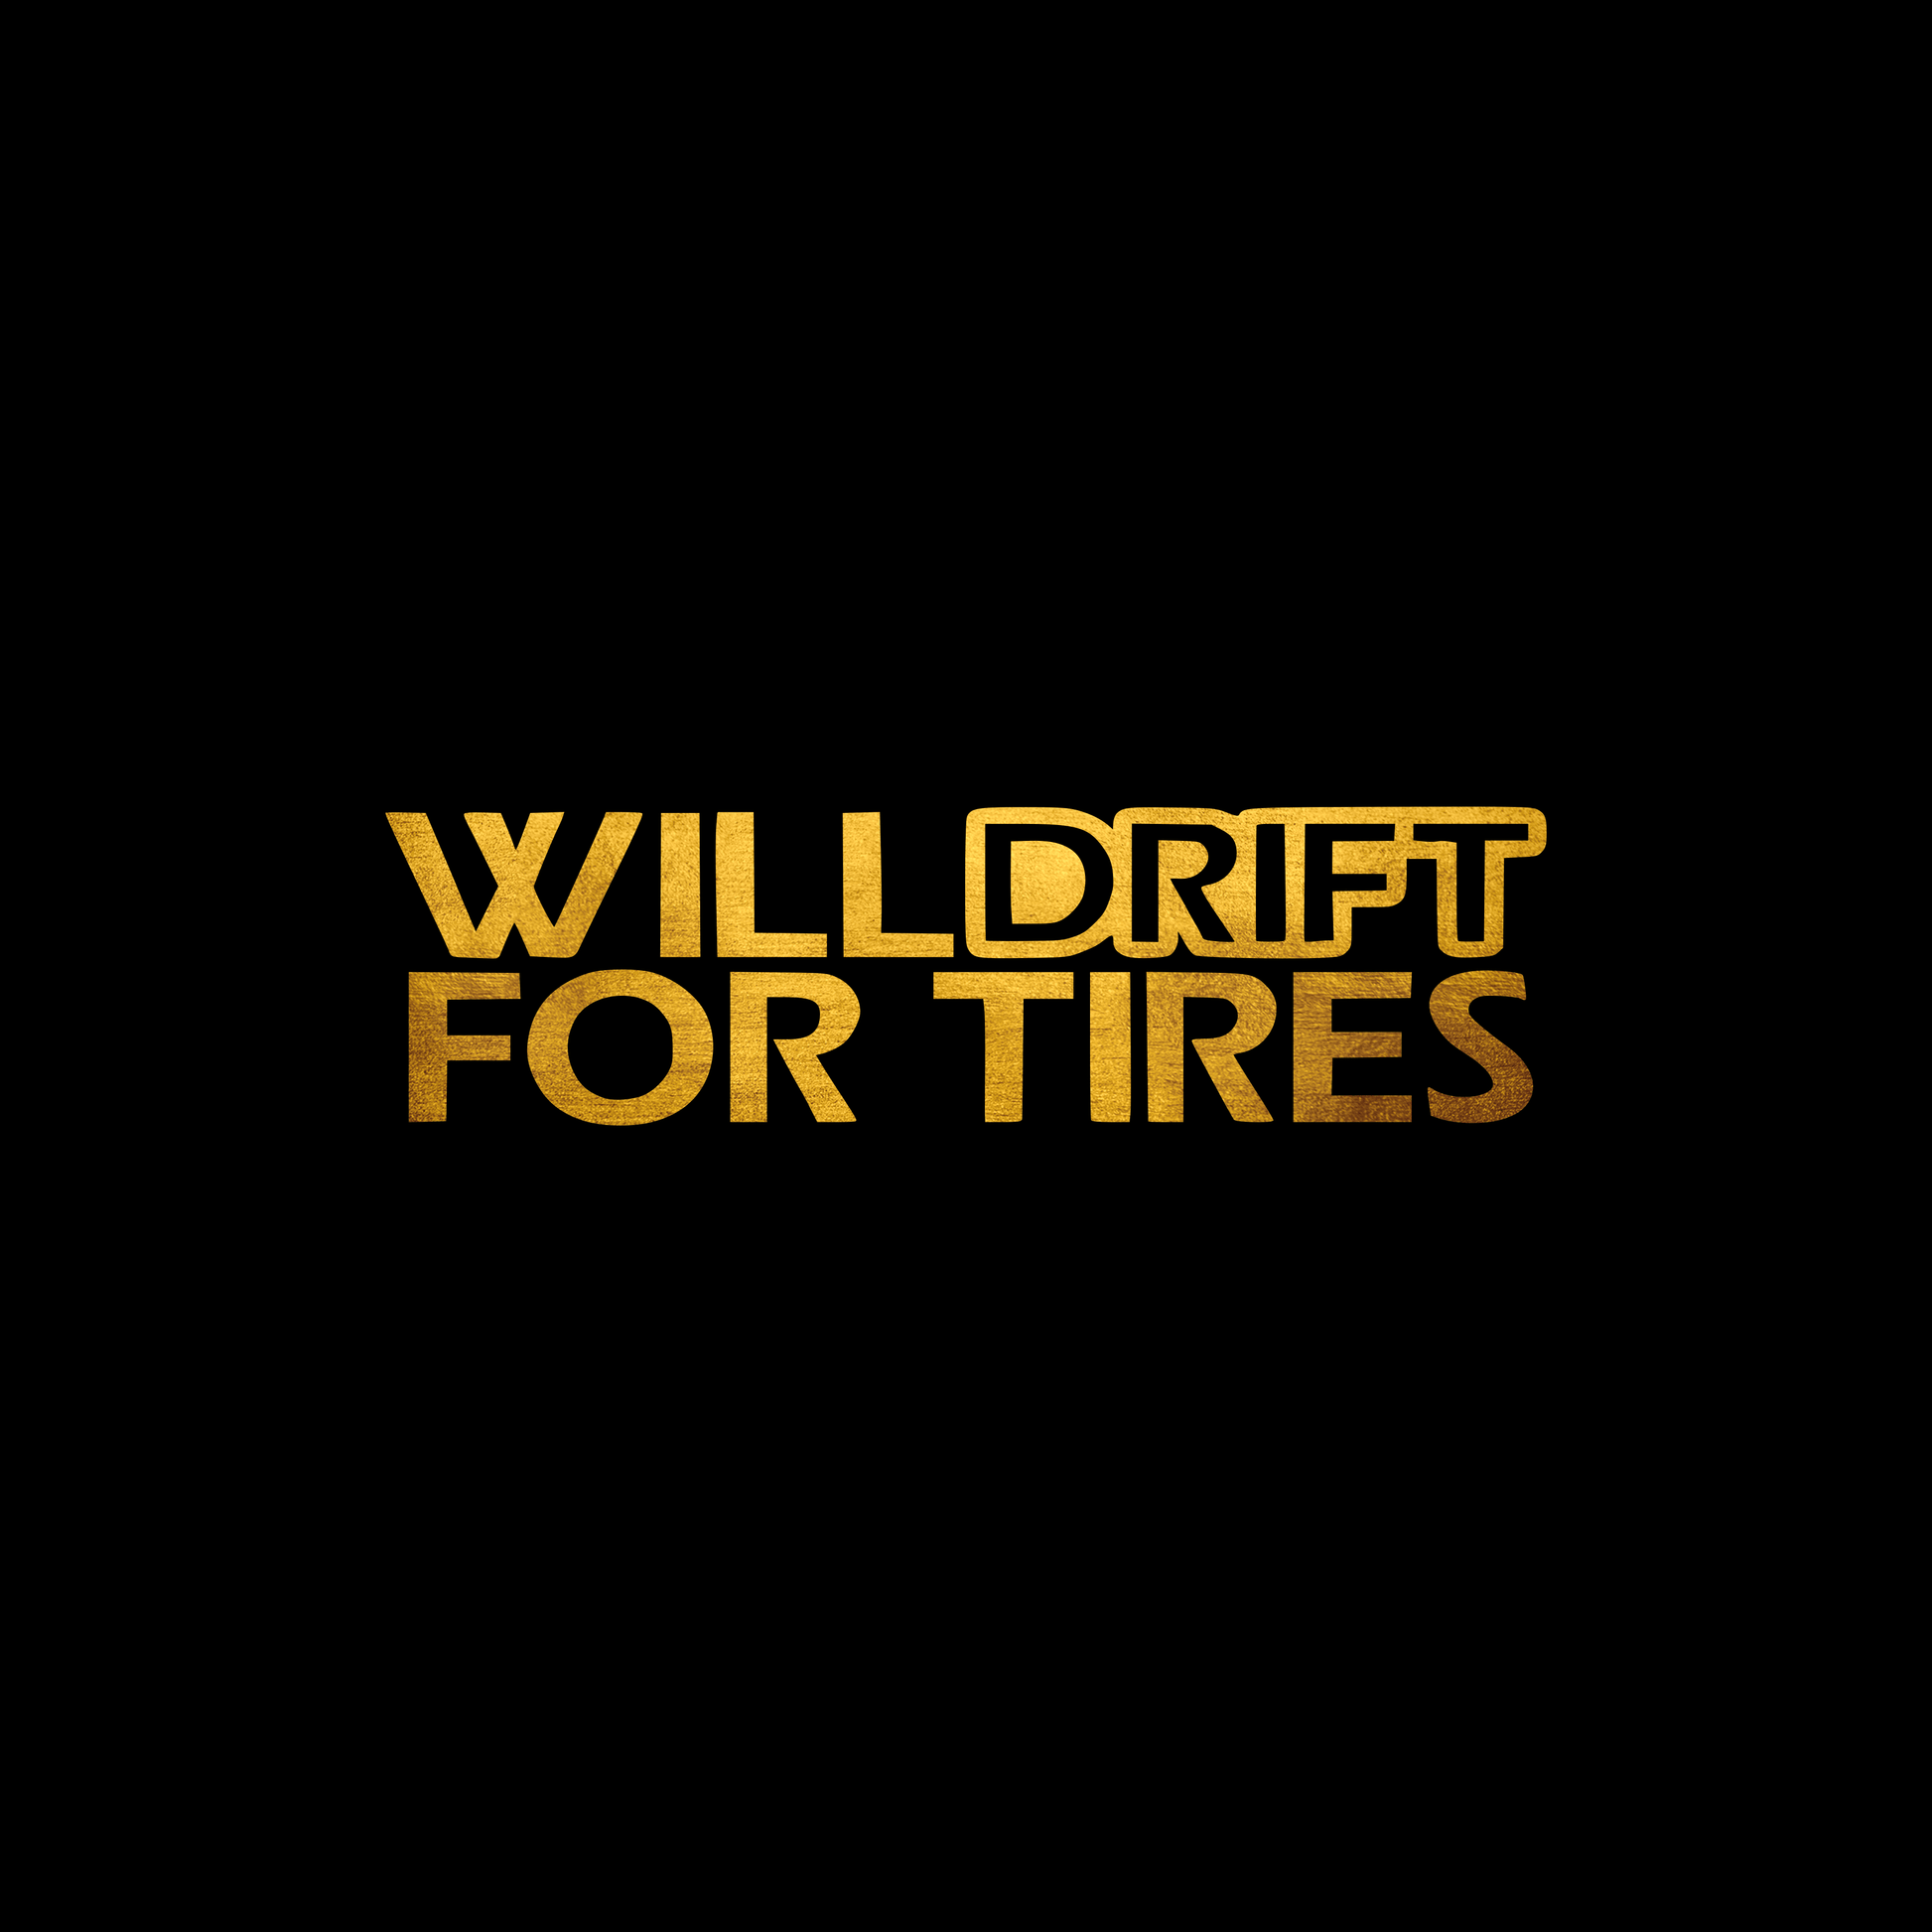 Will drift for tires sticker decal